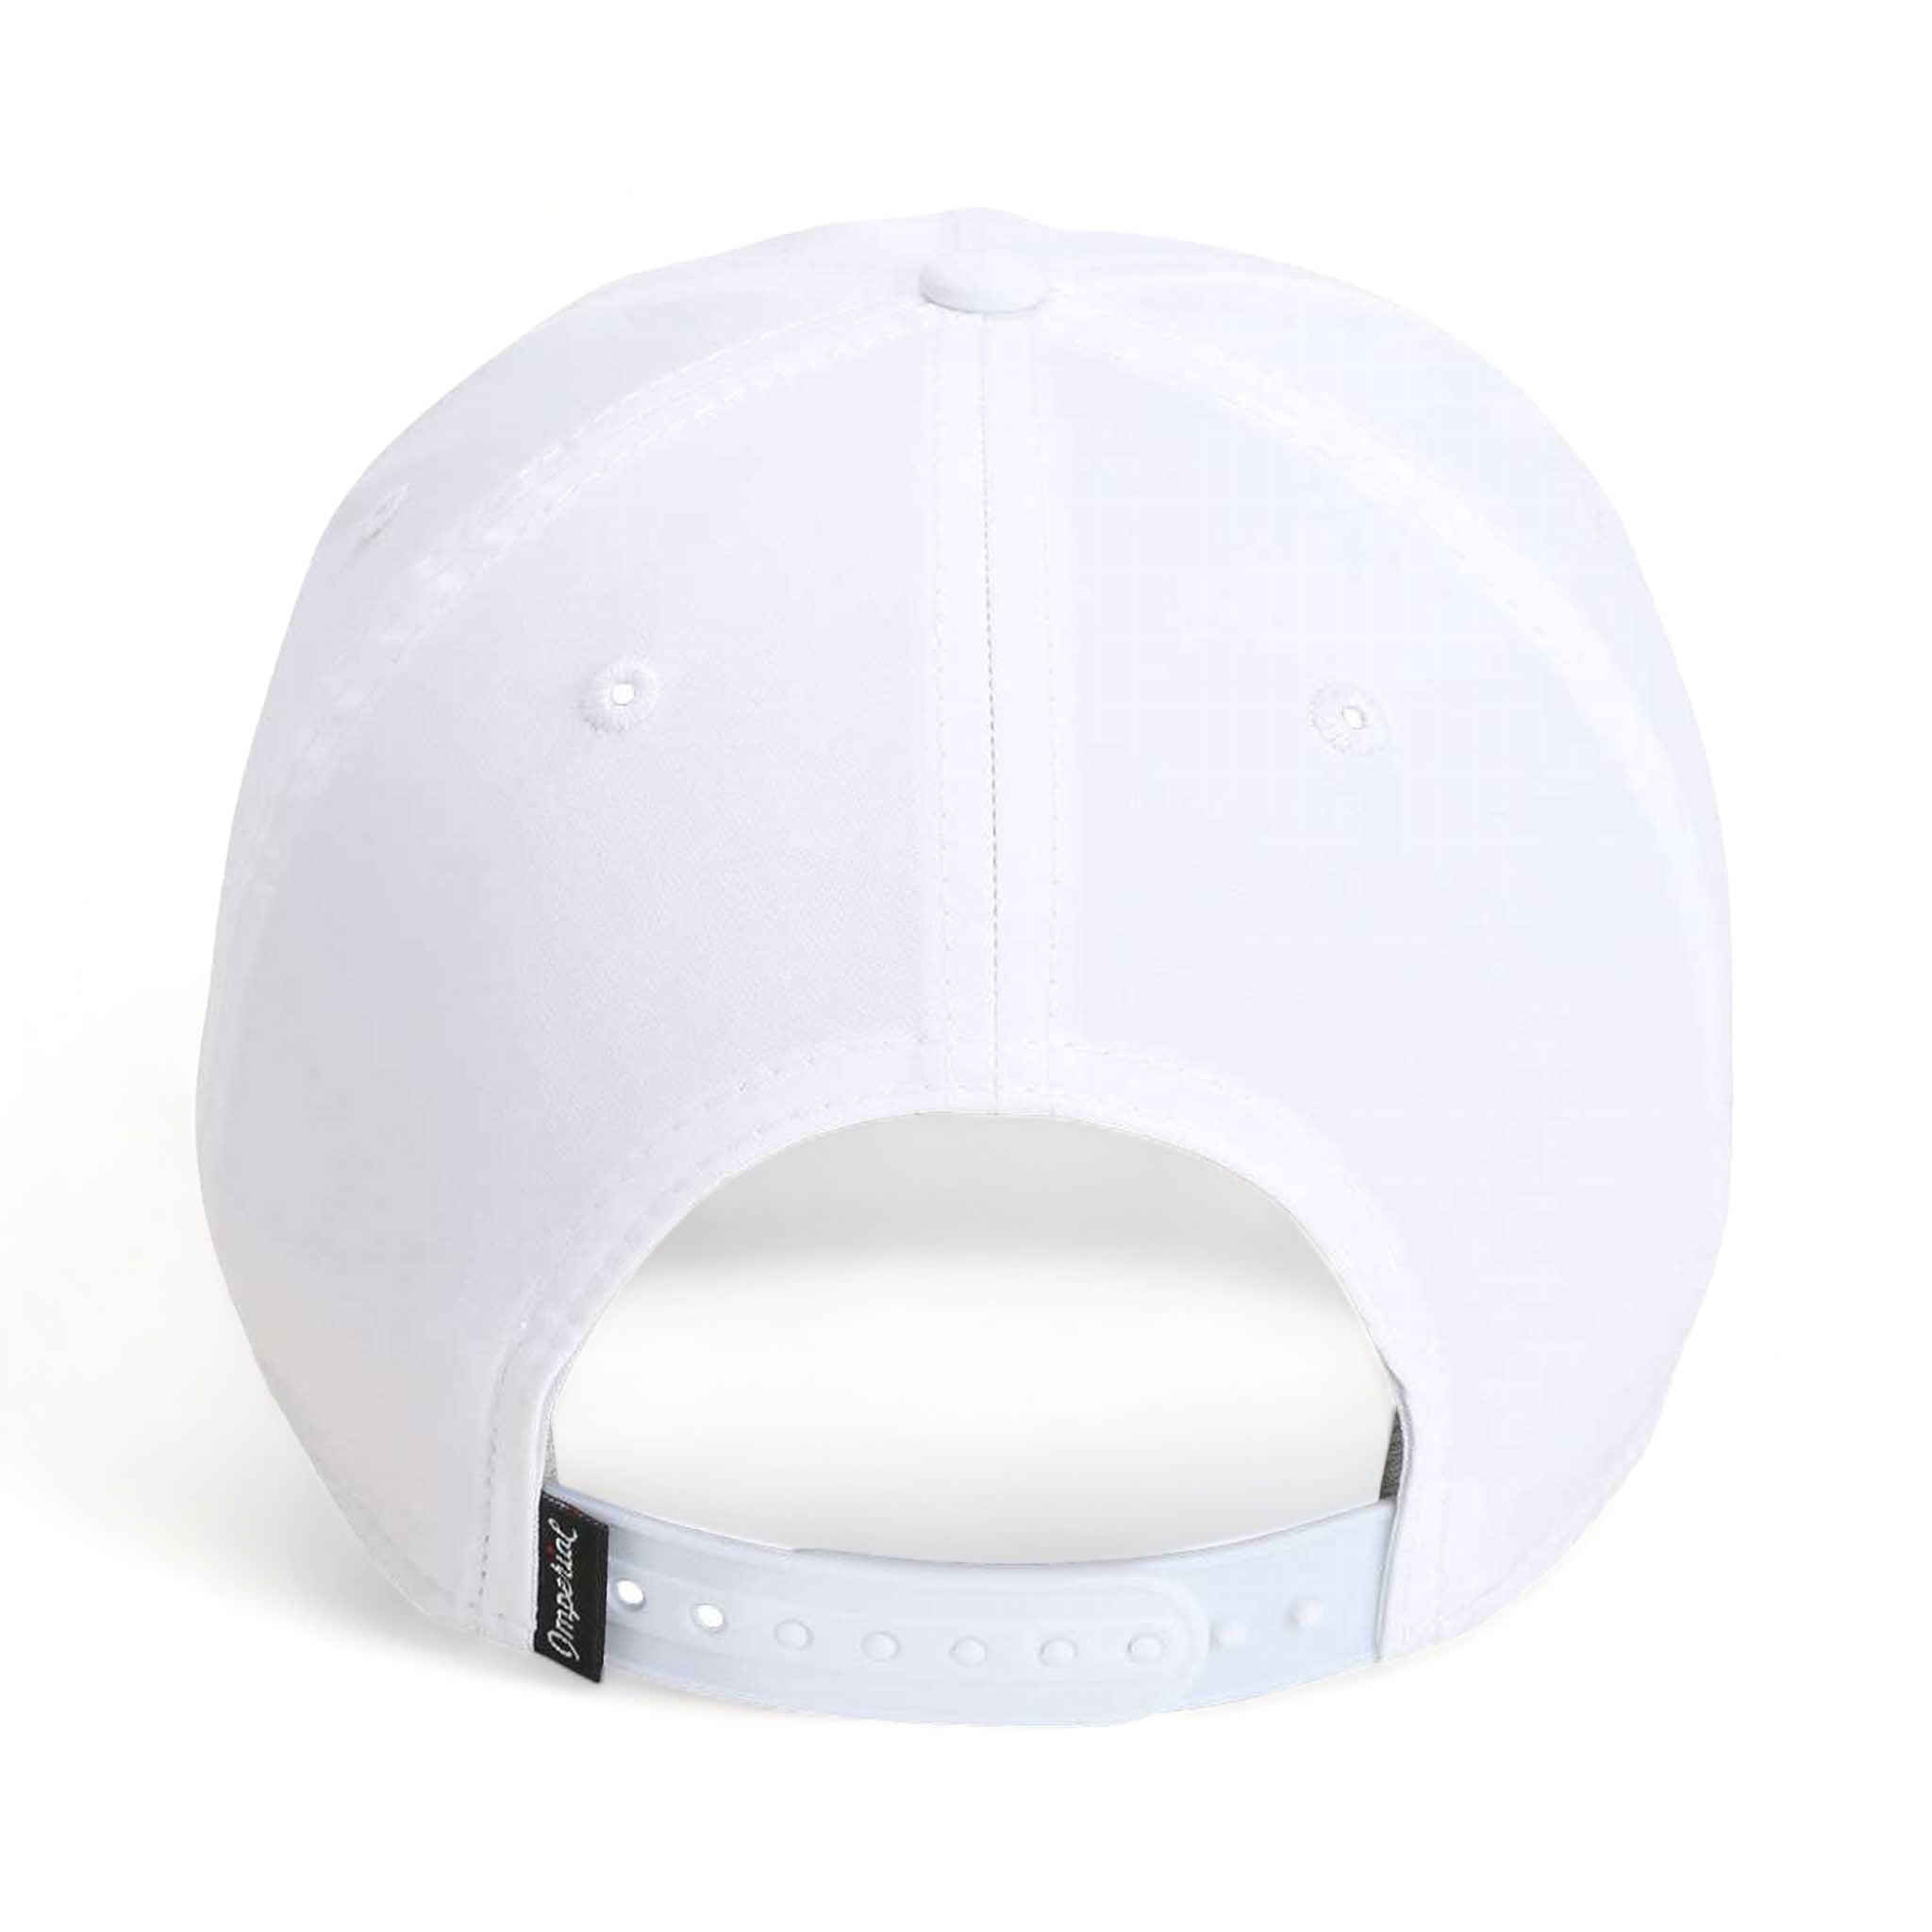 Back view of Imperial 5054 custom hat in white and navy-red